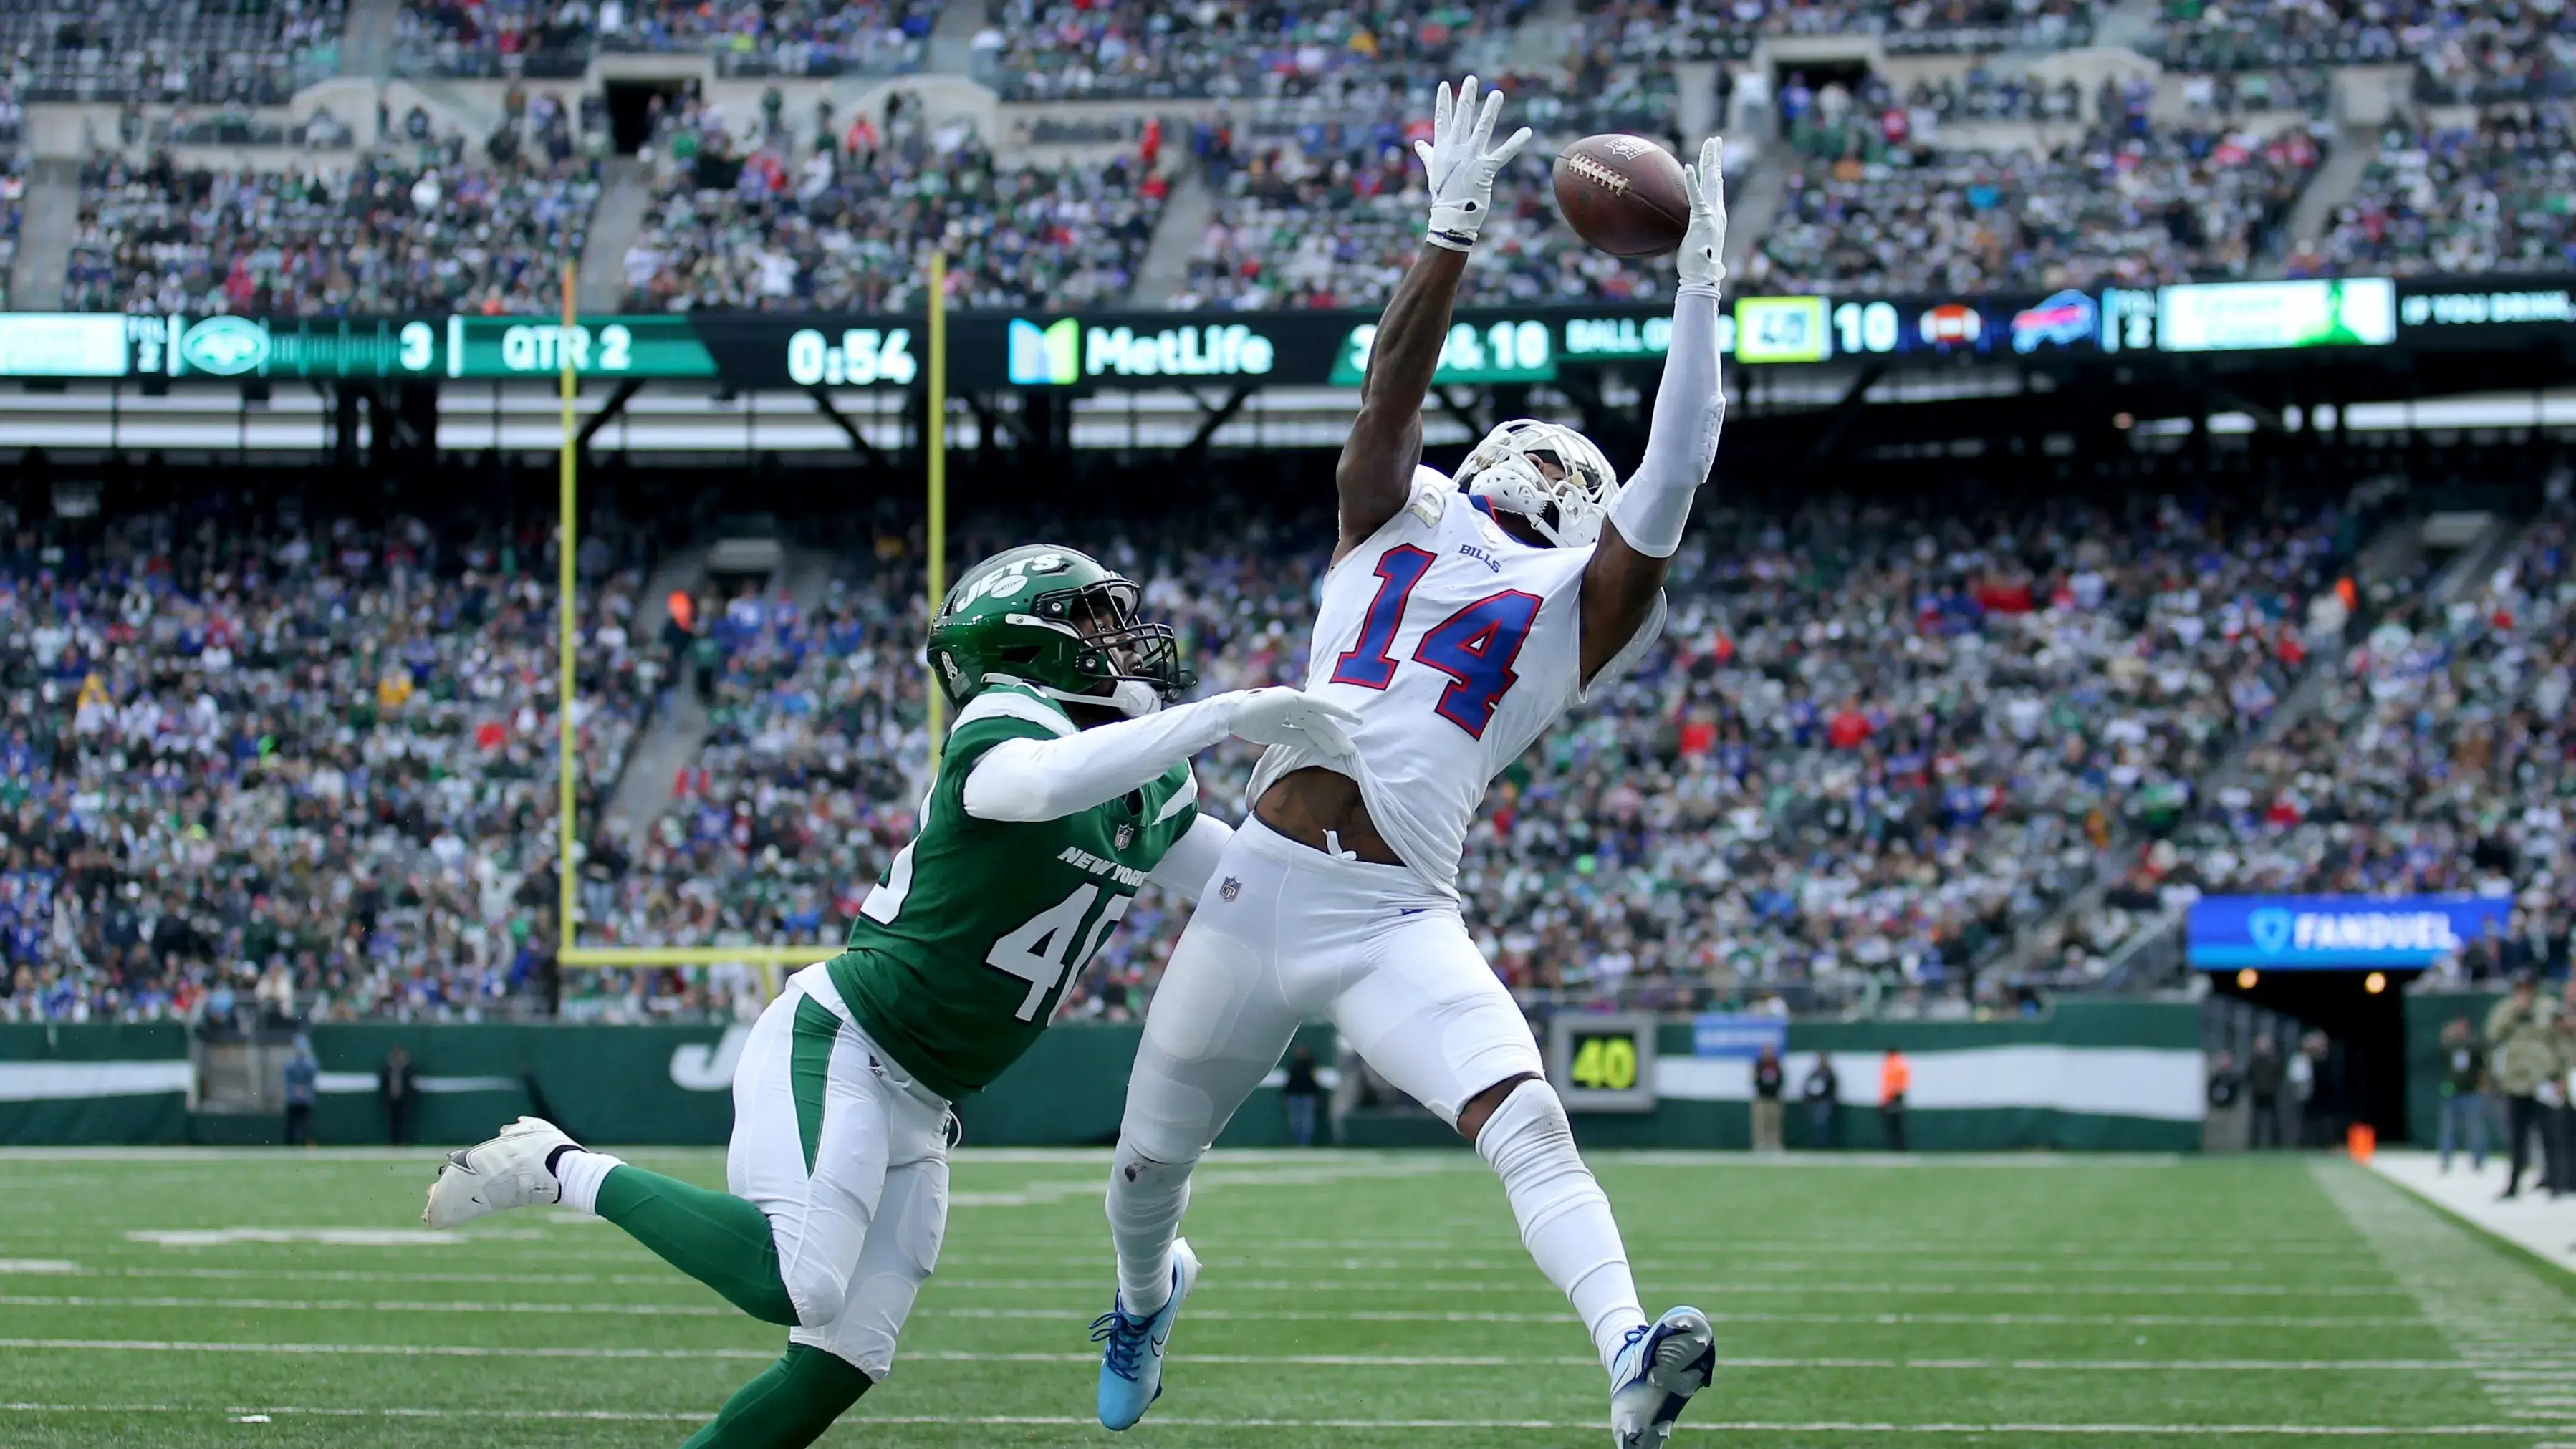 Buffalo Bills wide receiver Stefon Diggs (14) catches a touchdown pass against New York Jets cornerback Javelin Guidry (40) during the second quarter at MetLife Stadium. / Brad Penner-USA TODAY Sports